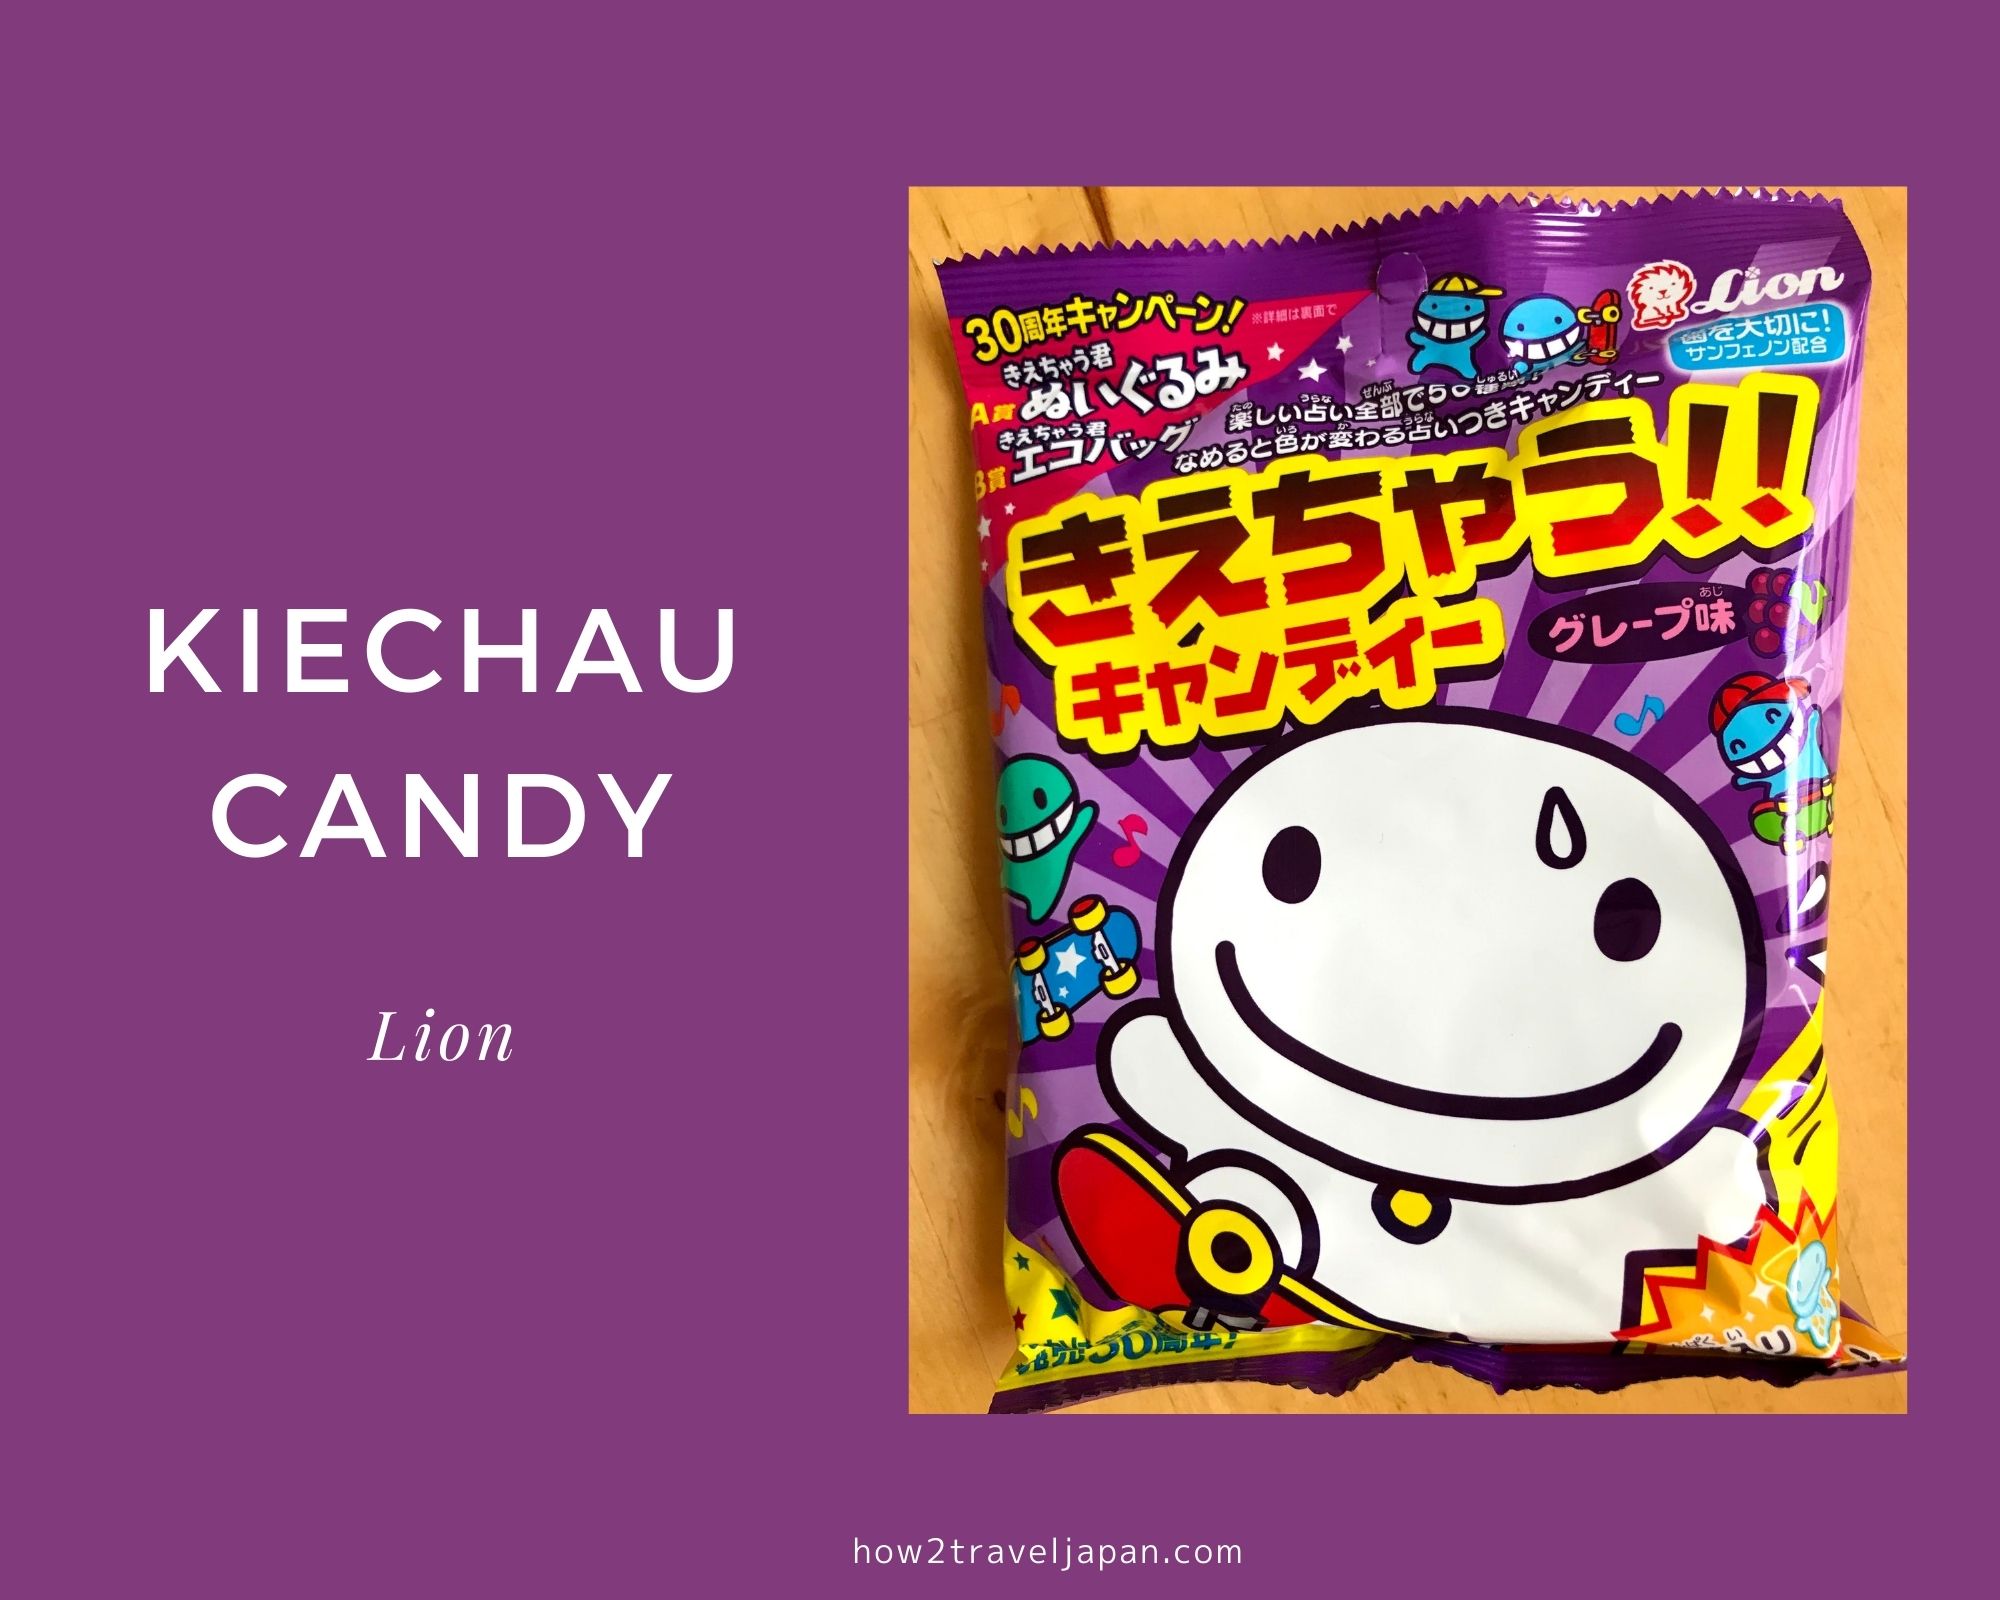 Read more about the article 30th anniversary【kiechau candy】vanished candy, from Lion